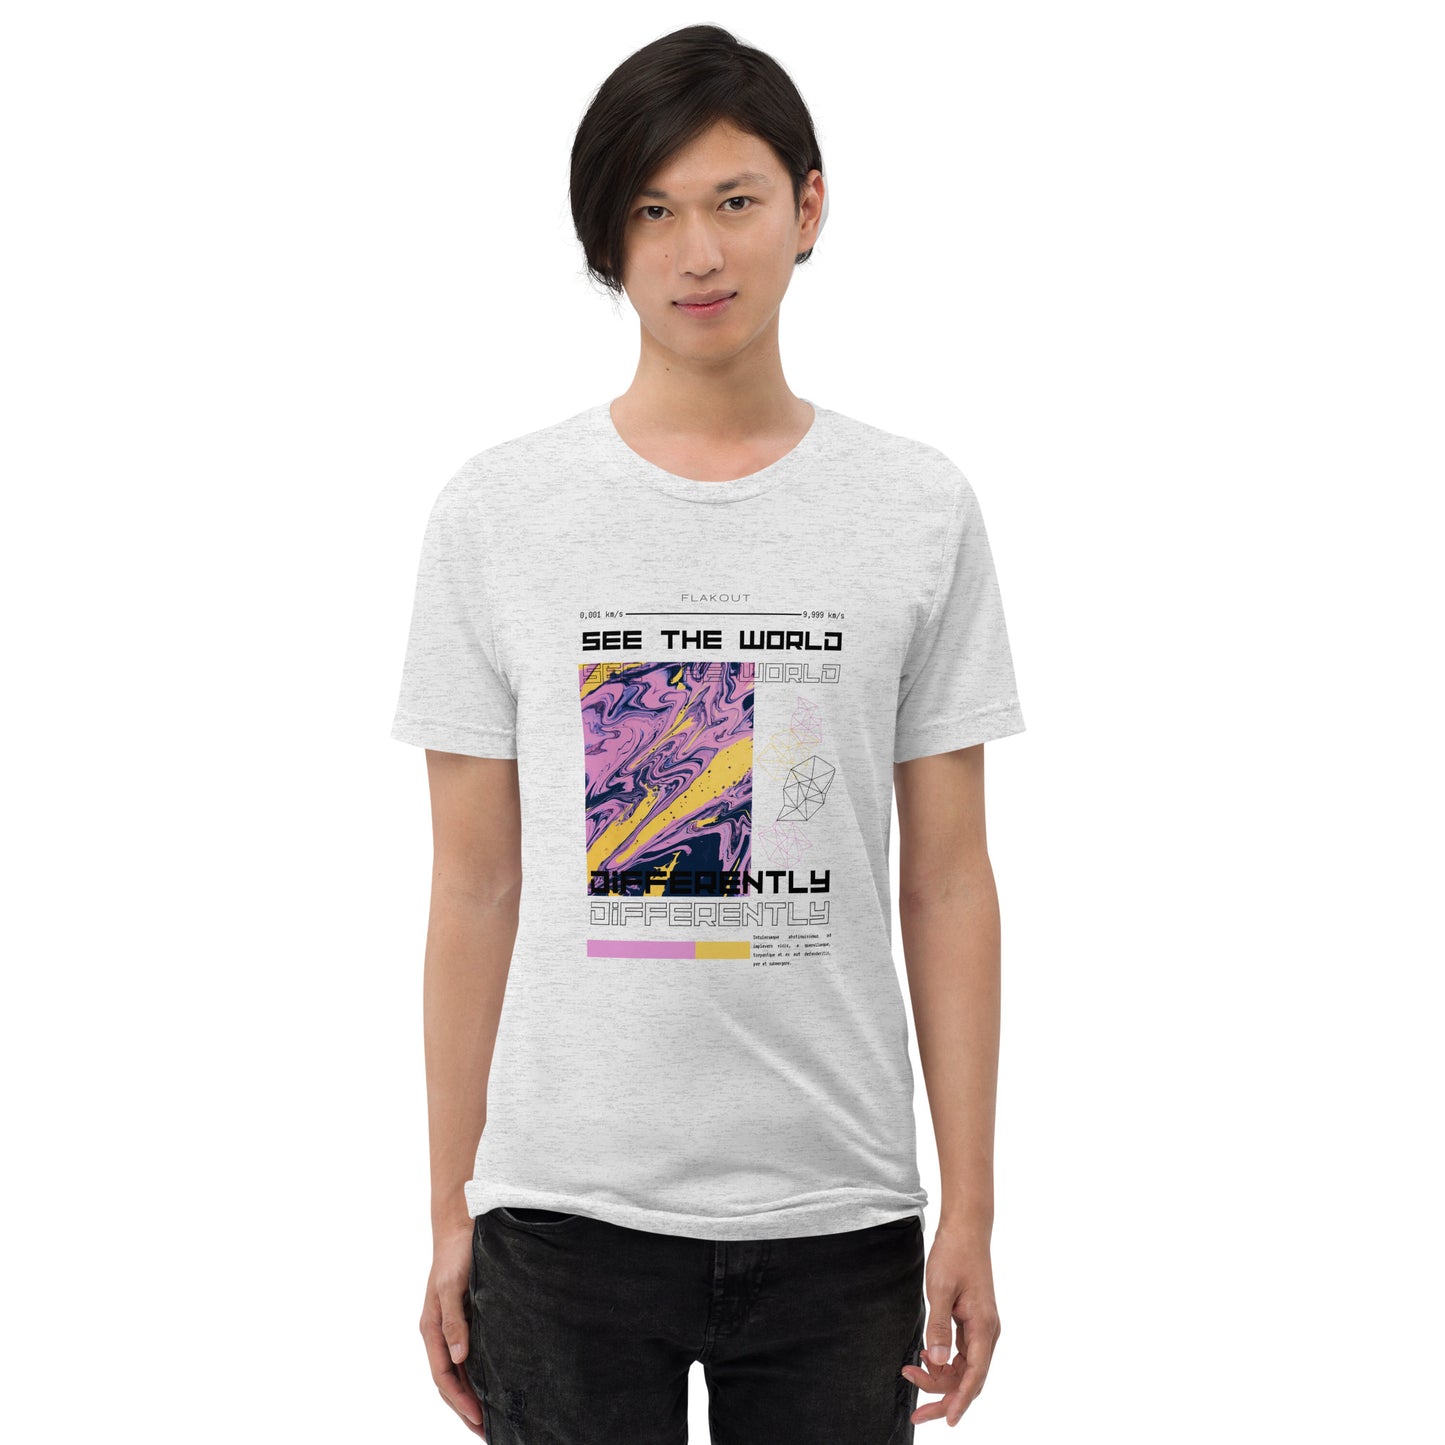 Divergent Horizon See The World Differently T-shirt